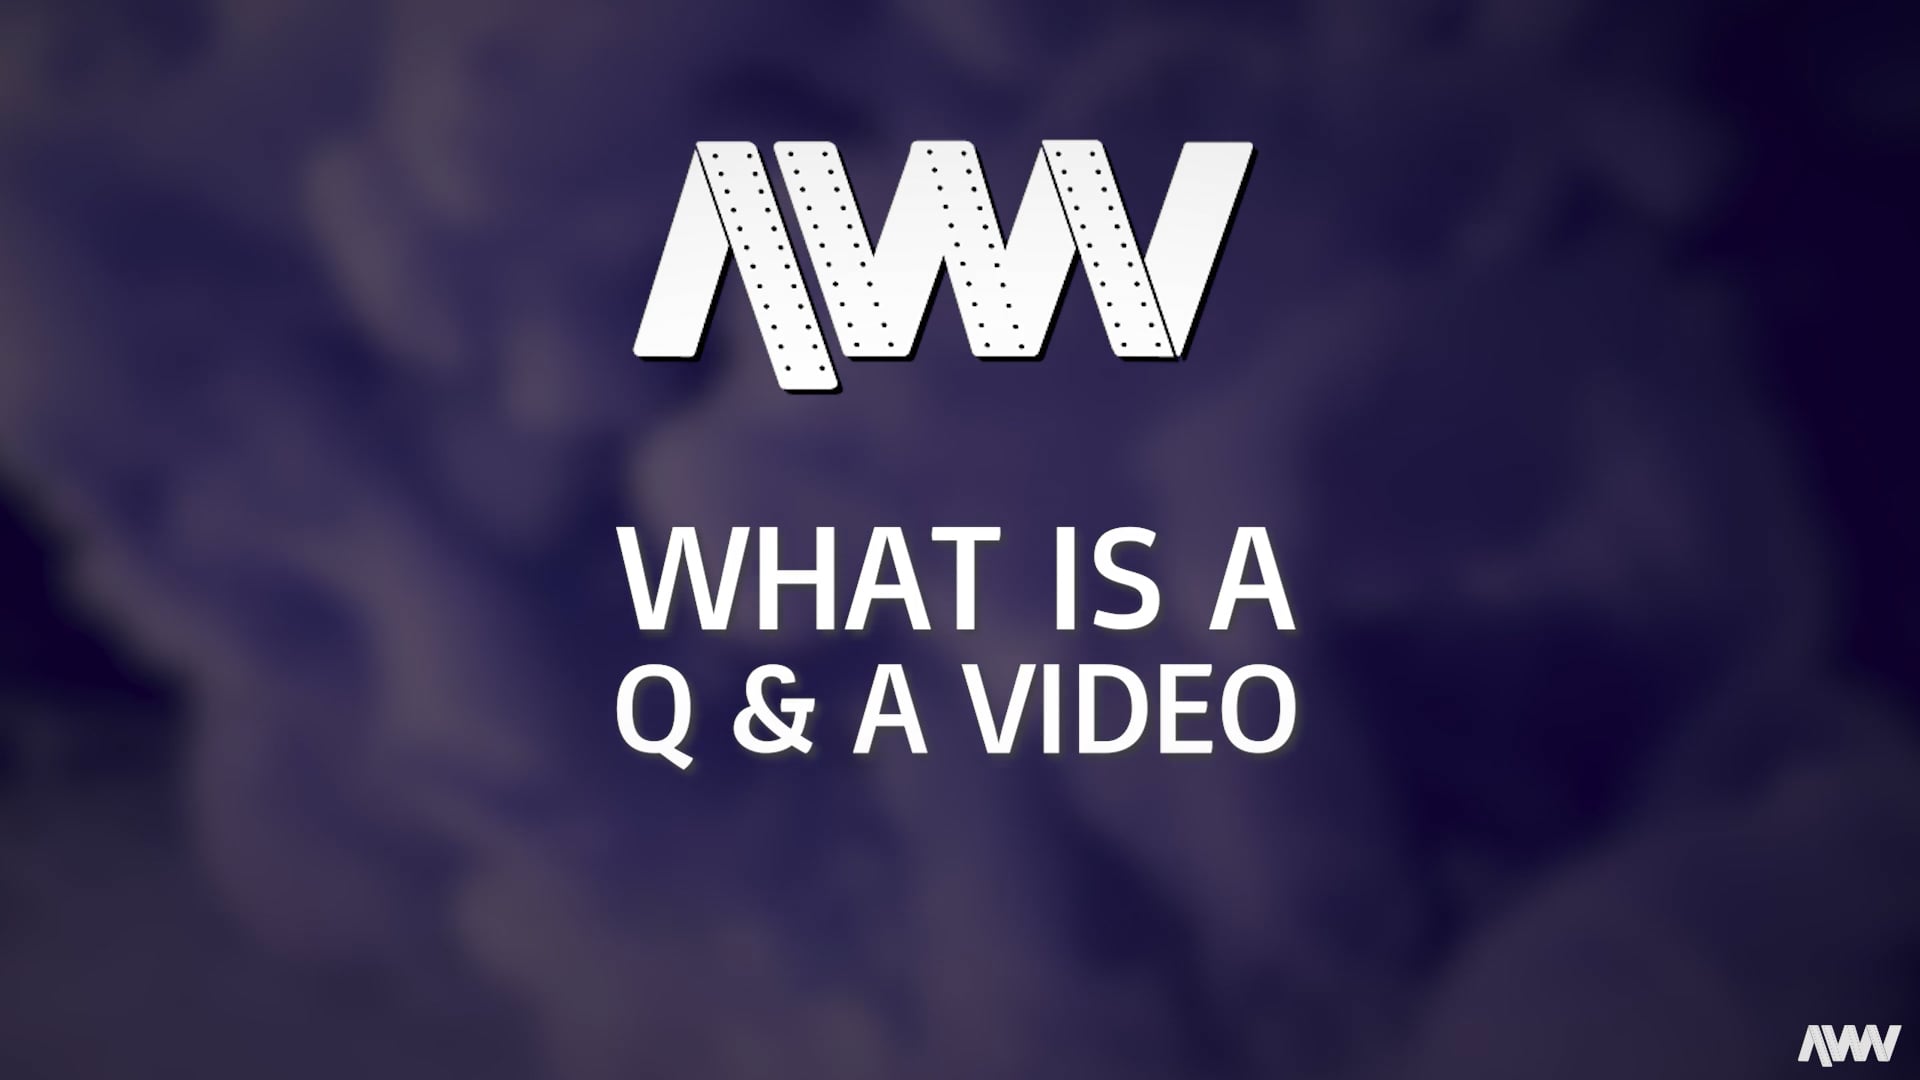 What is a Q & A Video?